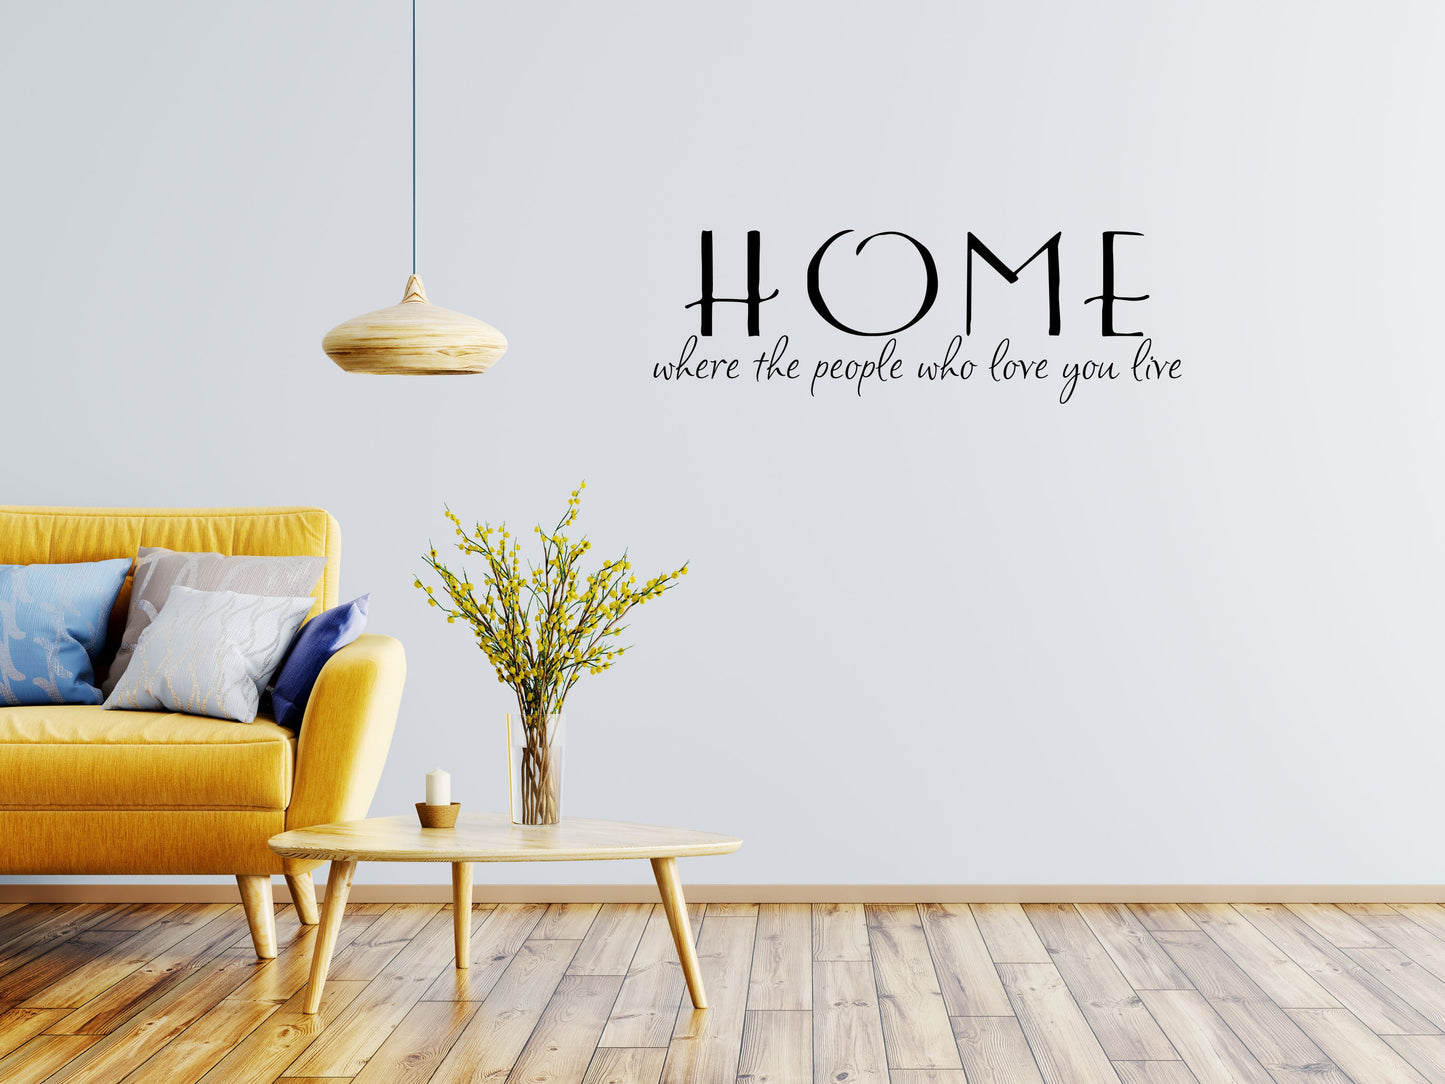 Family Wall Vinyl Lettering - Home Where The People Who Love You Live - Home Vinyl Wall Quotes - Wall Art Decals - Living Room Quote Vinyl Wall Decal Done 